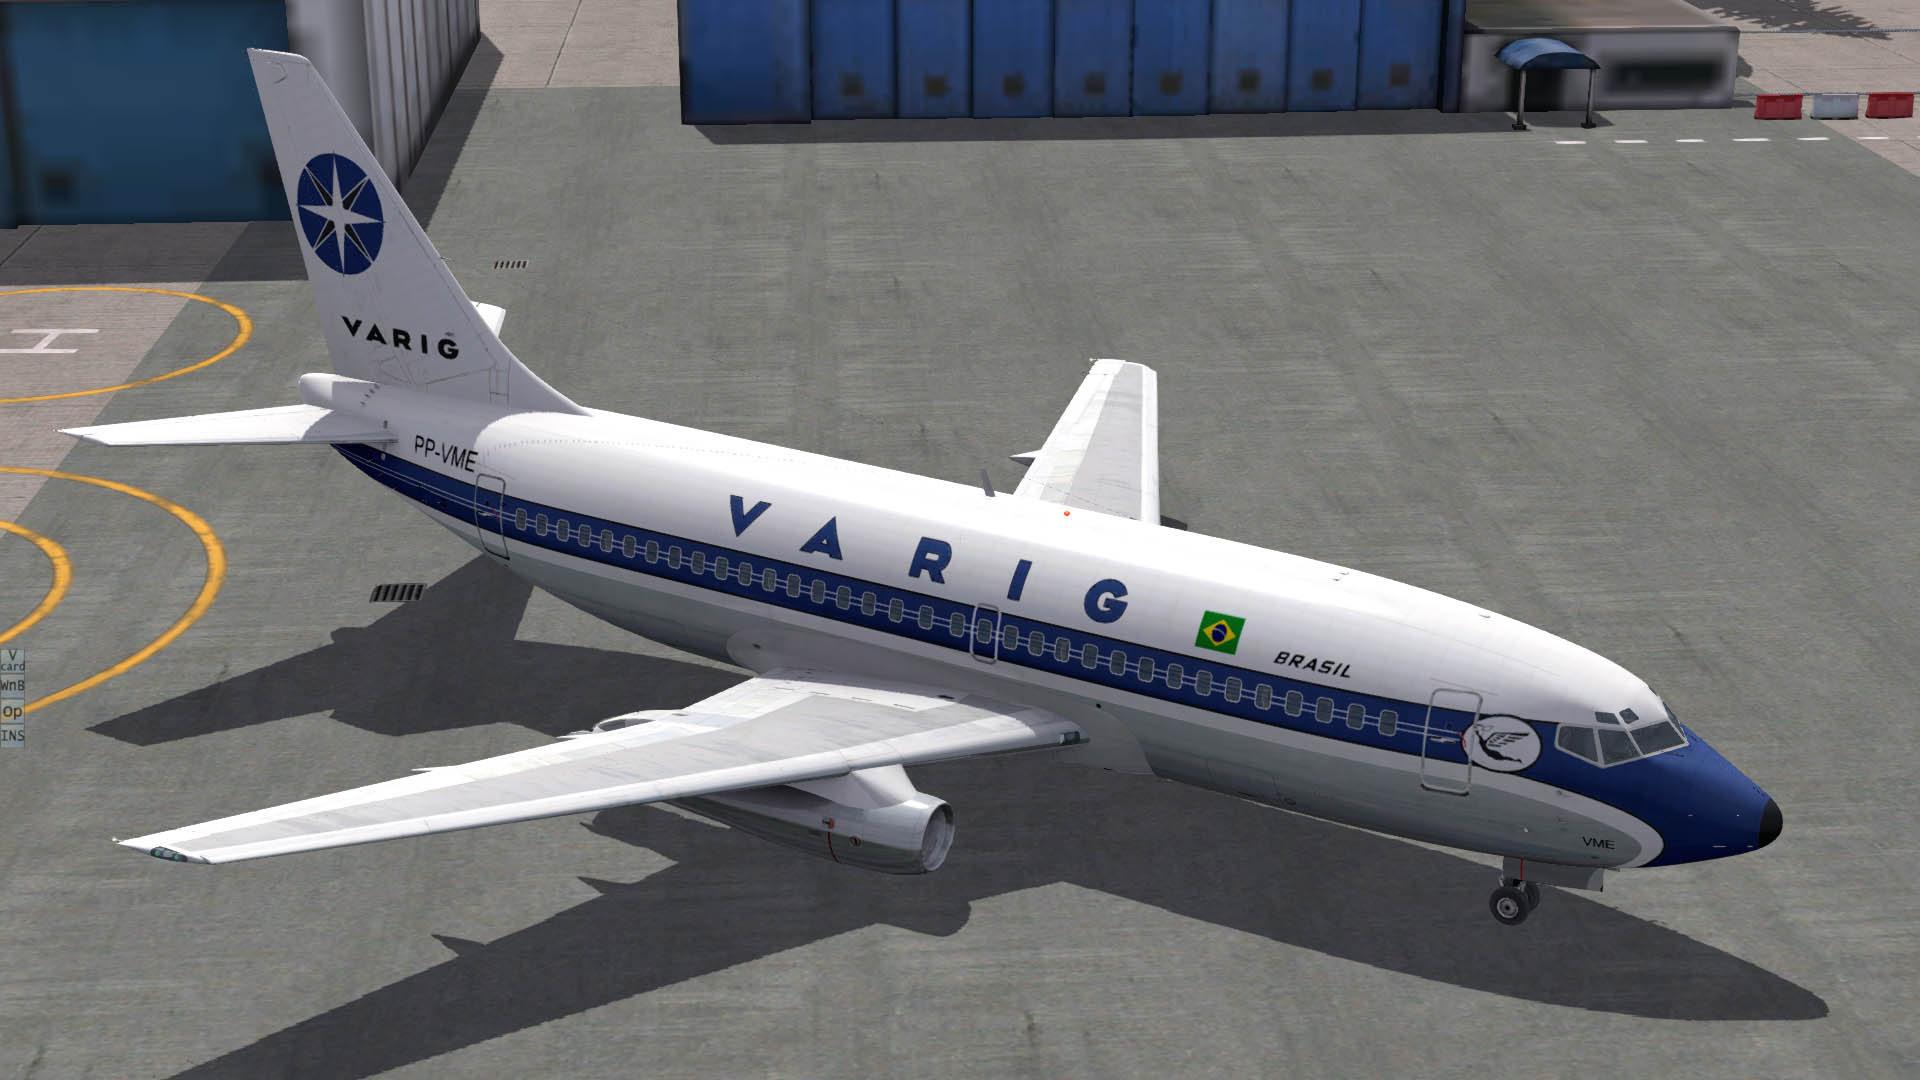 More information about "Varig - Boeing 737-200 TwinJet"